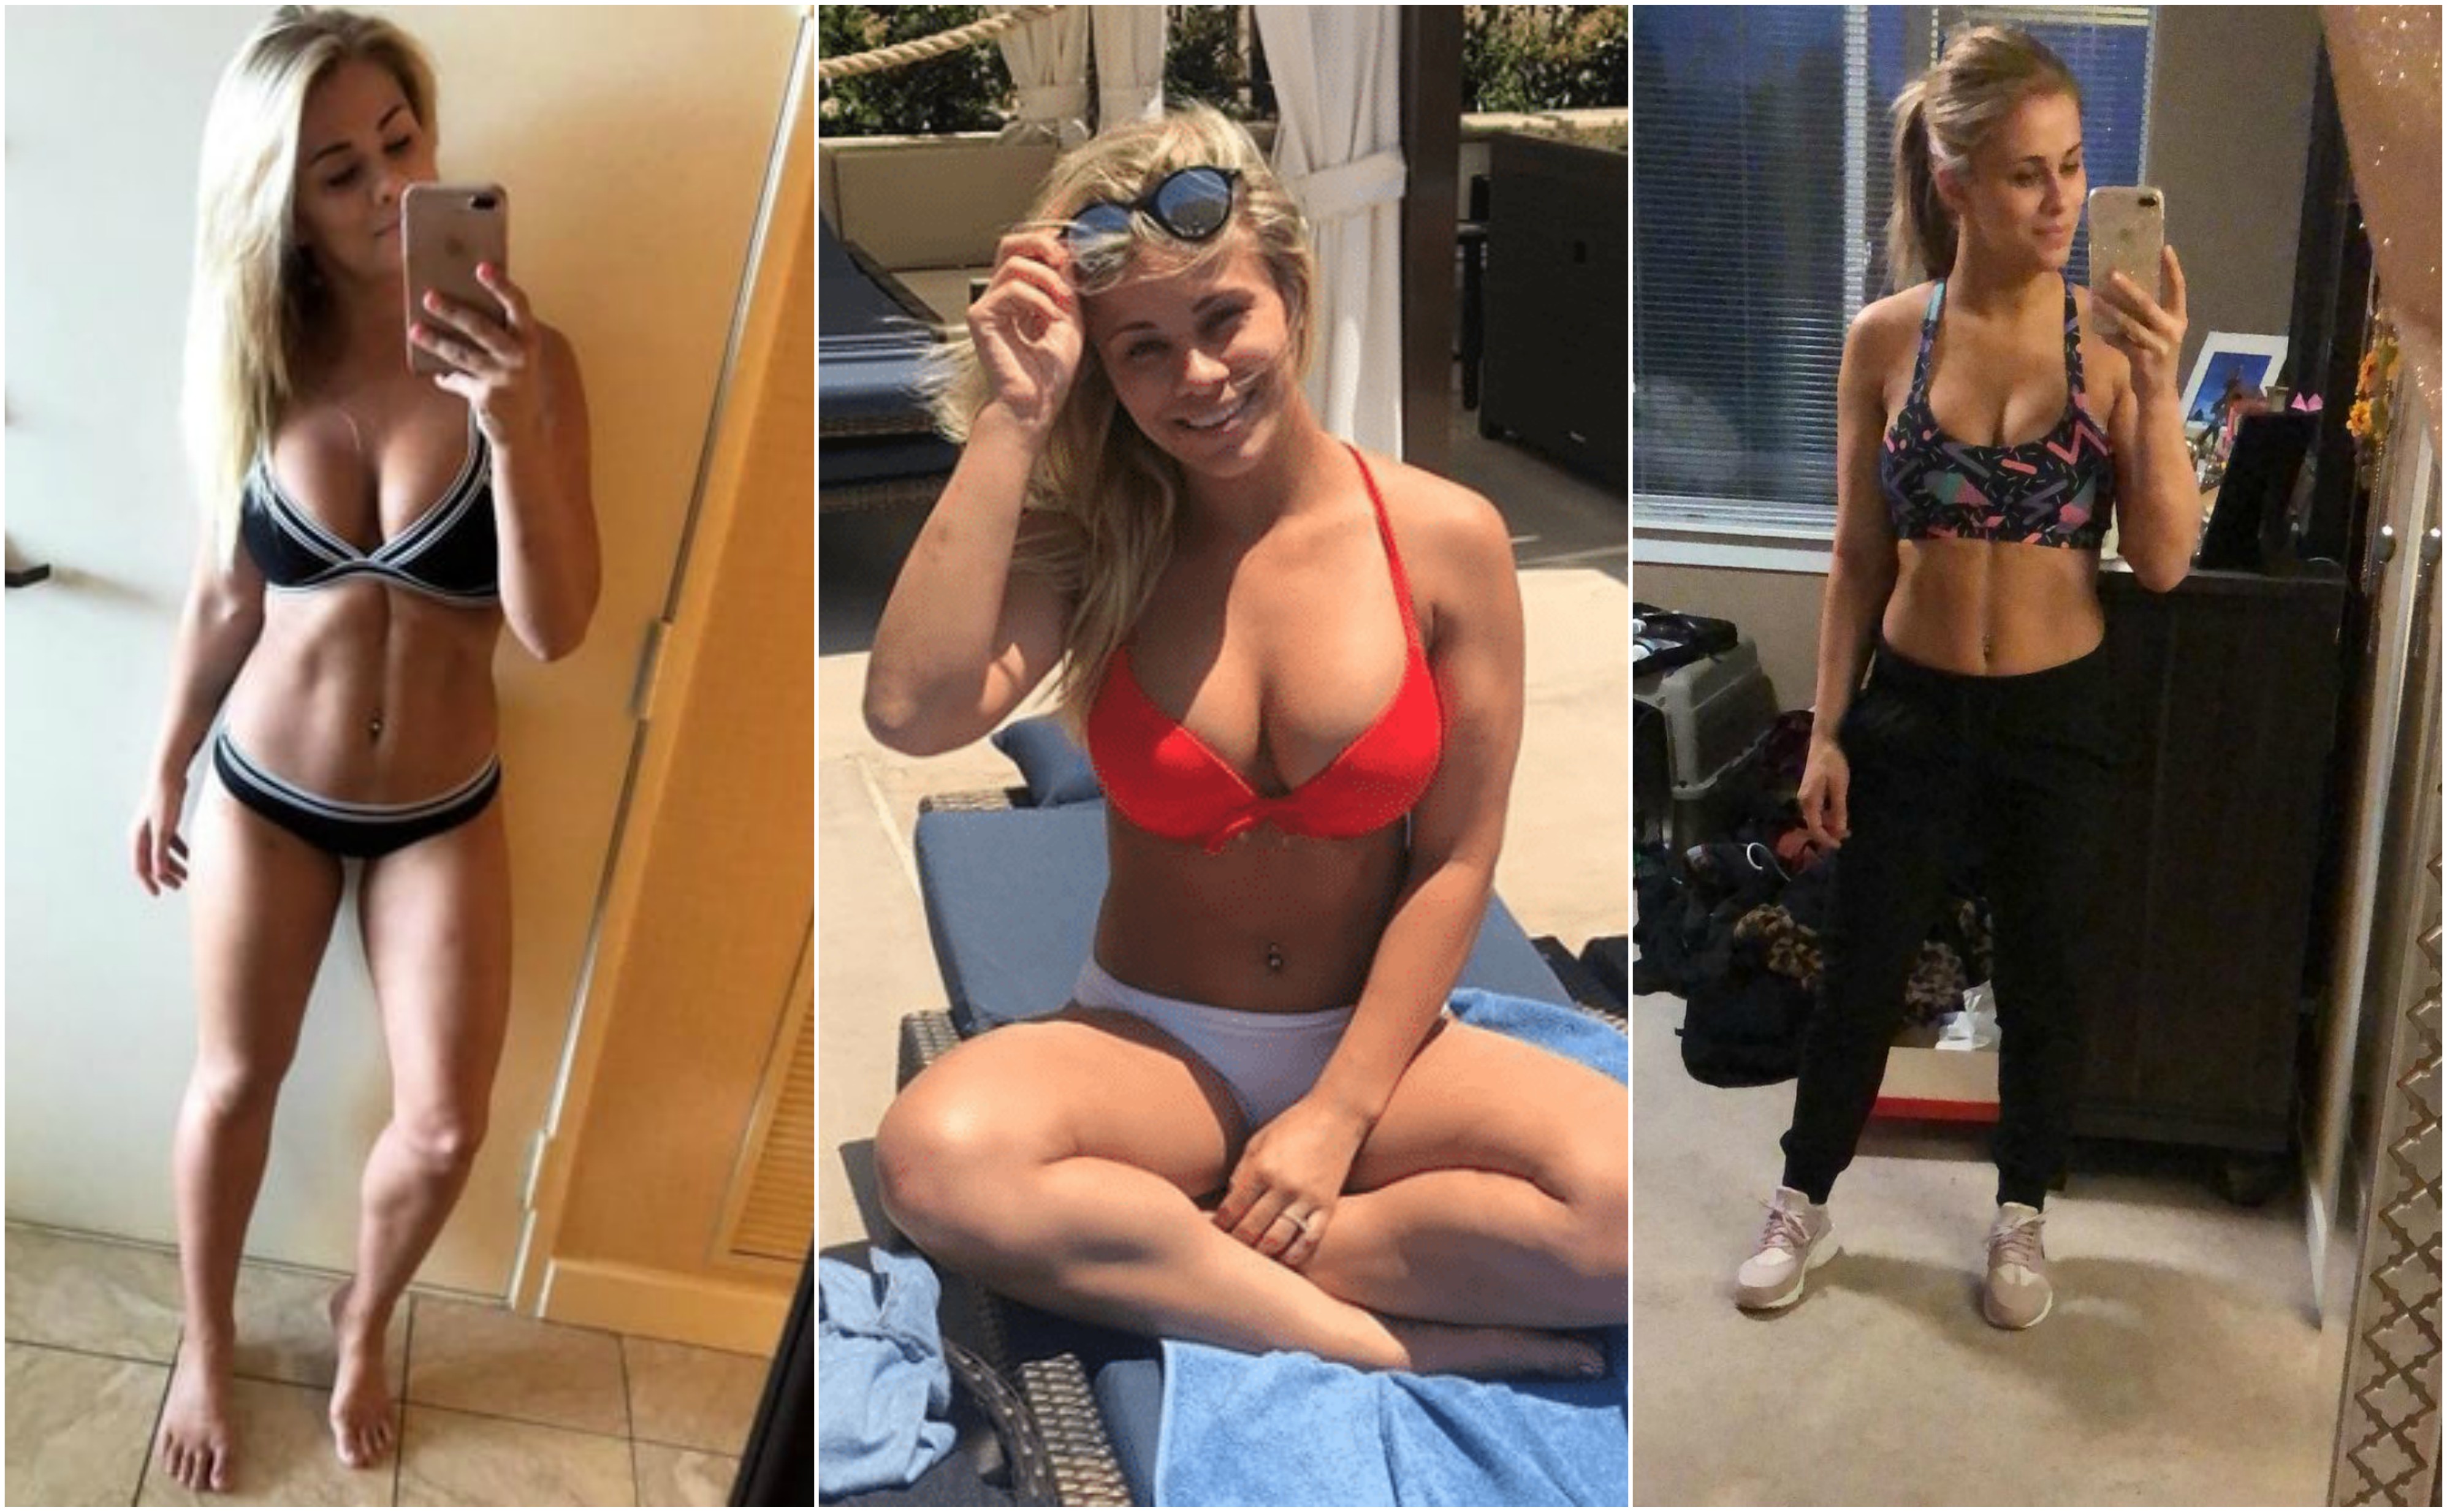 Read “UFC's Paige VanZant Reveals She'll Be In The SI Swi...